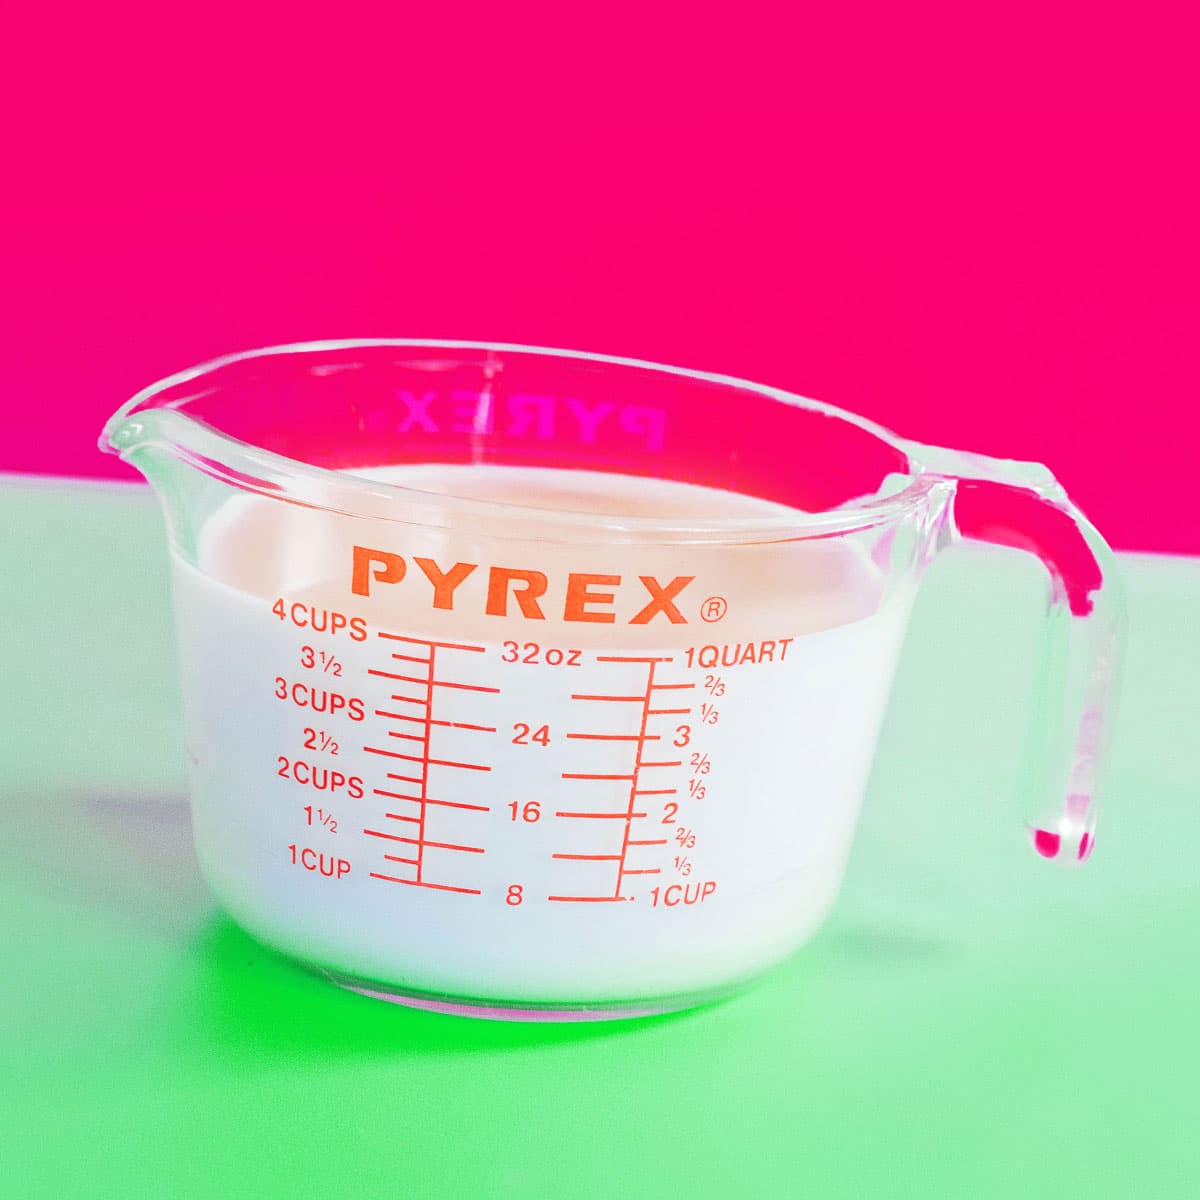 Glass pyrex liter on colorful background.